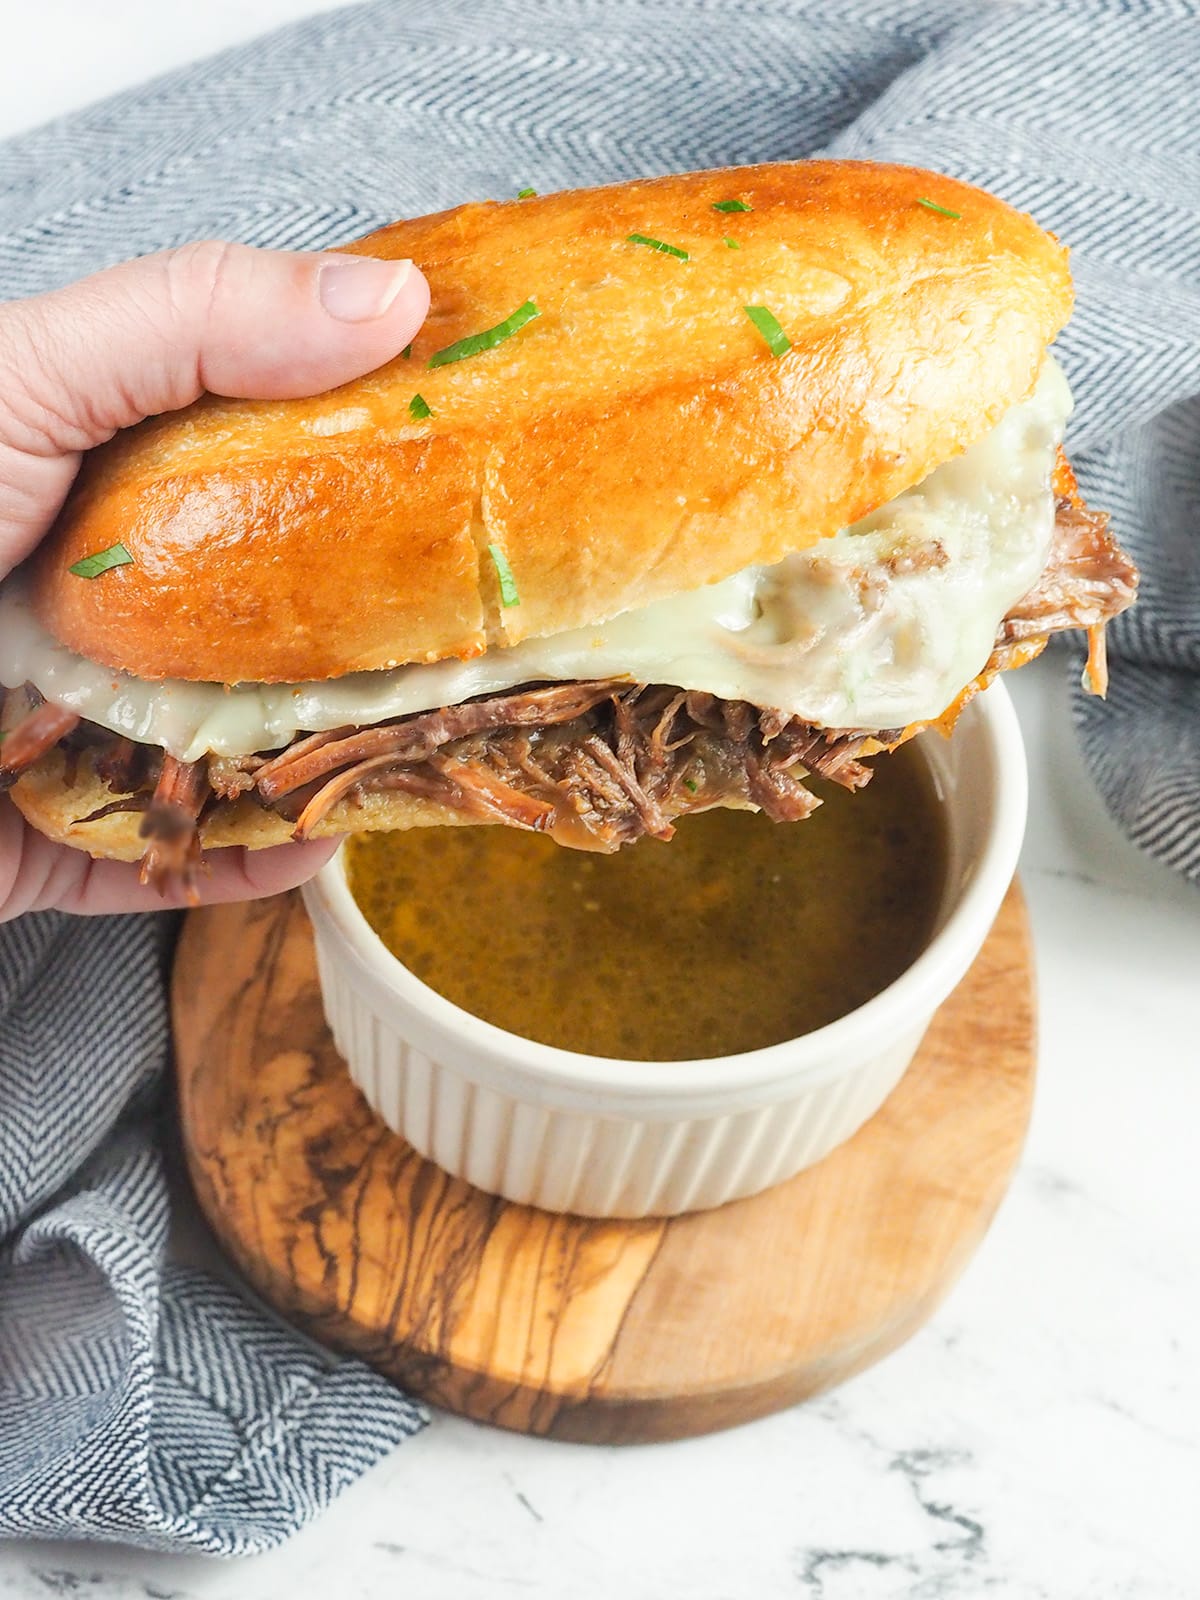 French dip sandwich being dipped into au jus gravy